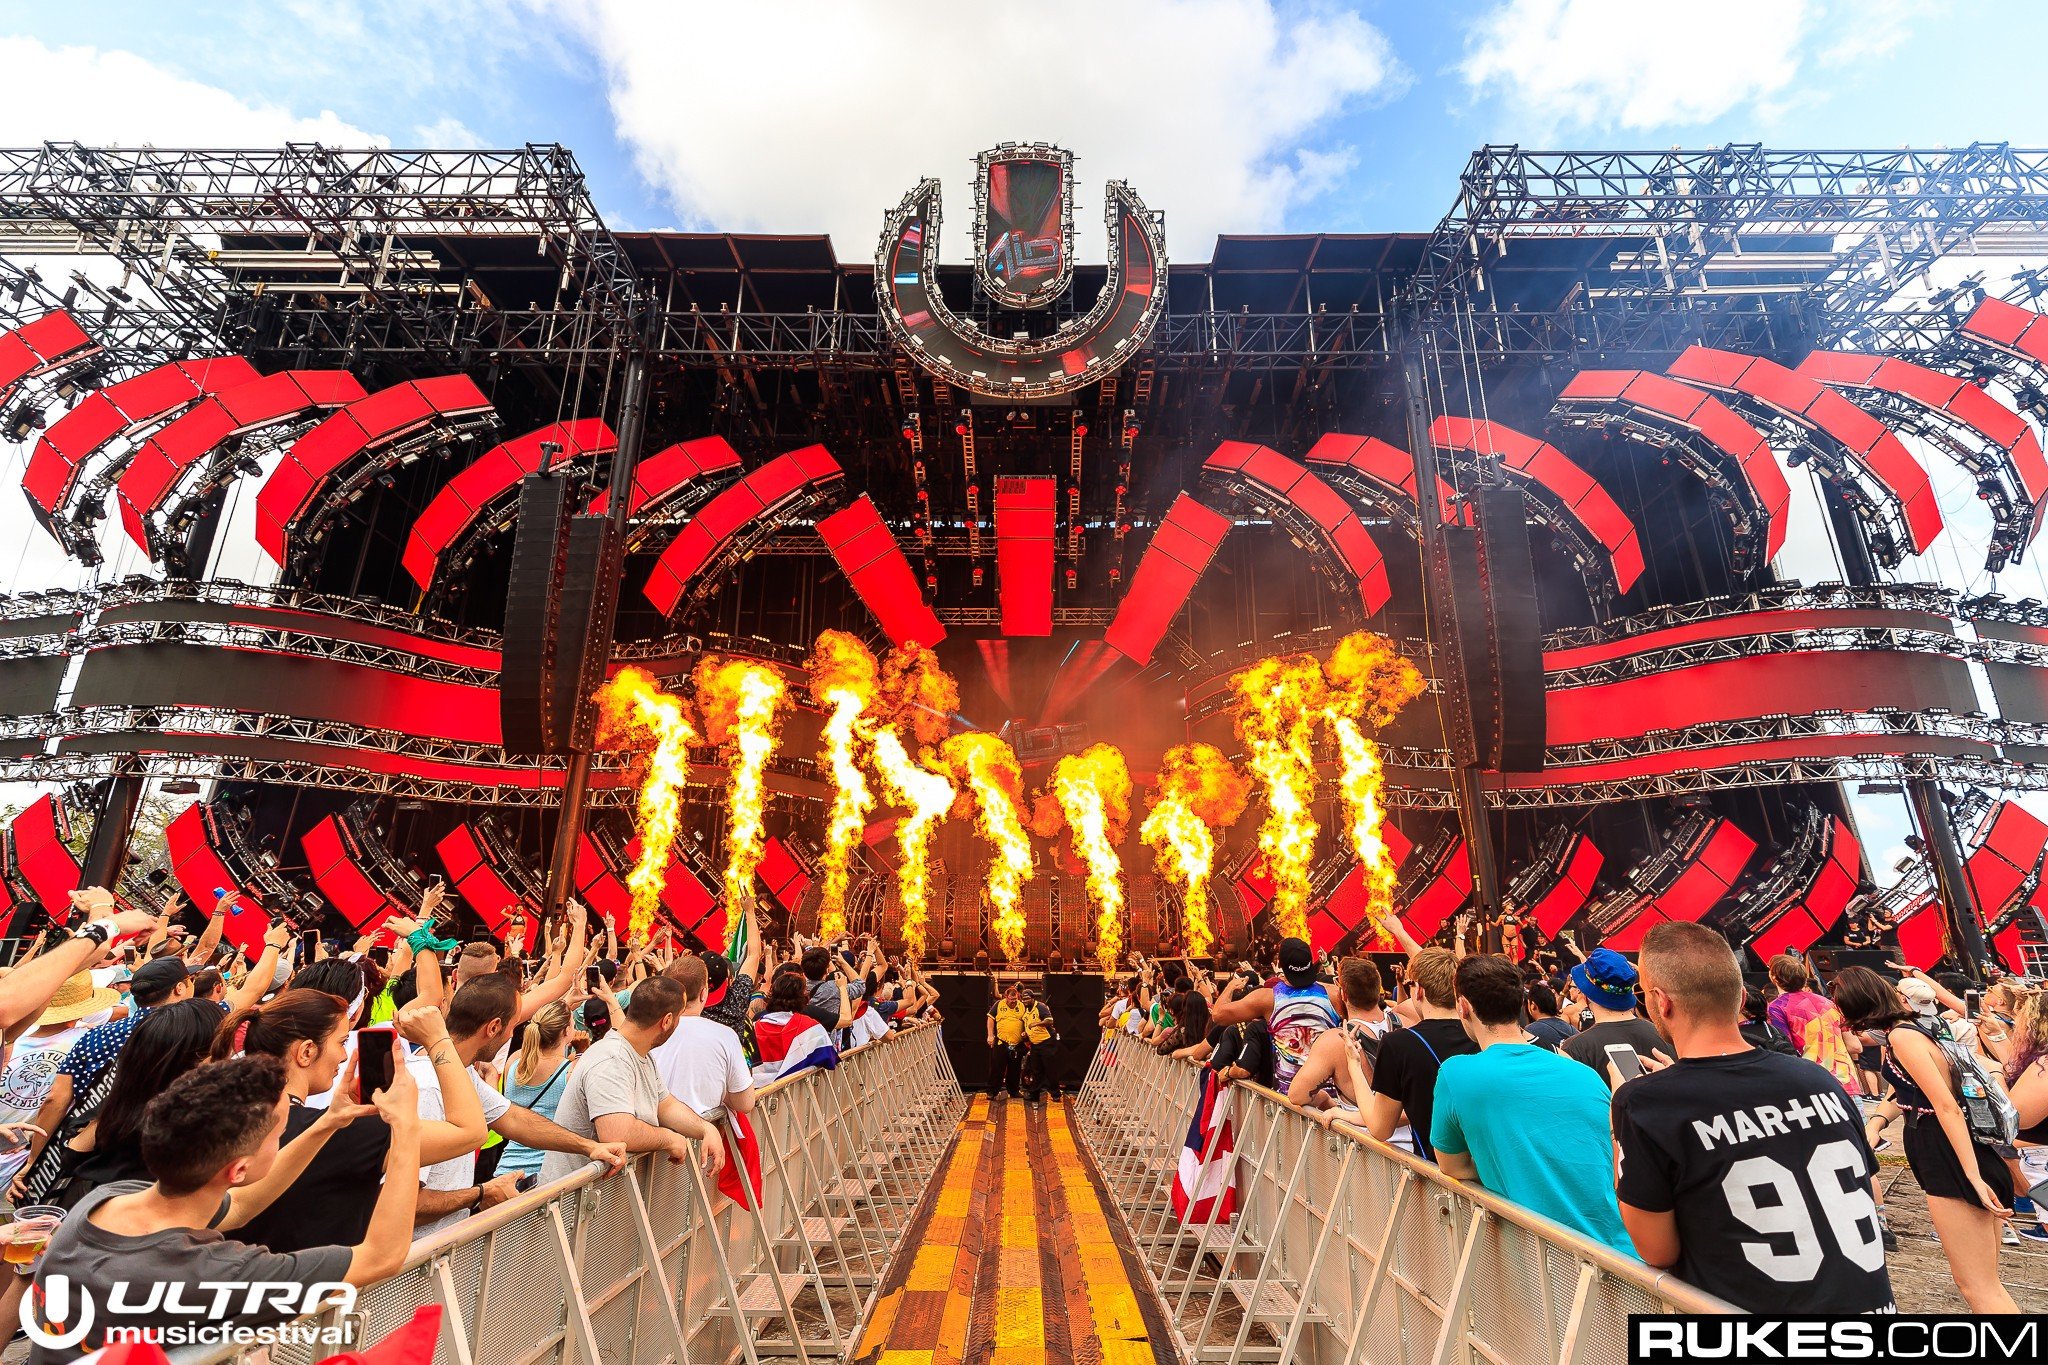 crowds, Ultra Music Festival, Rukes.com, Stages, Lights, Photography, Fire, Music Wallpaper